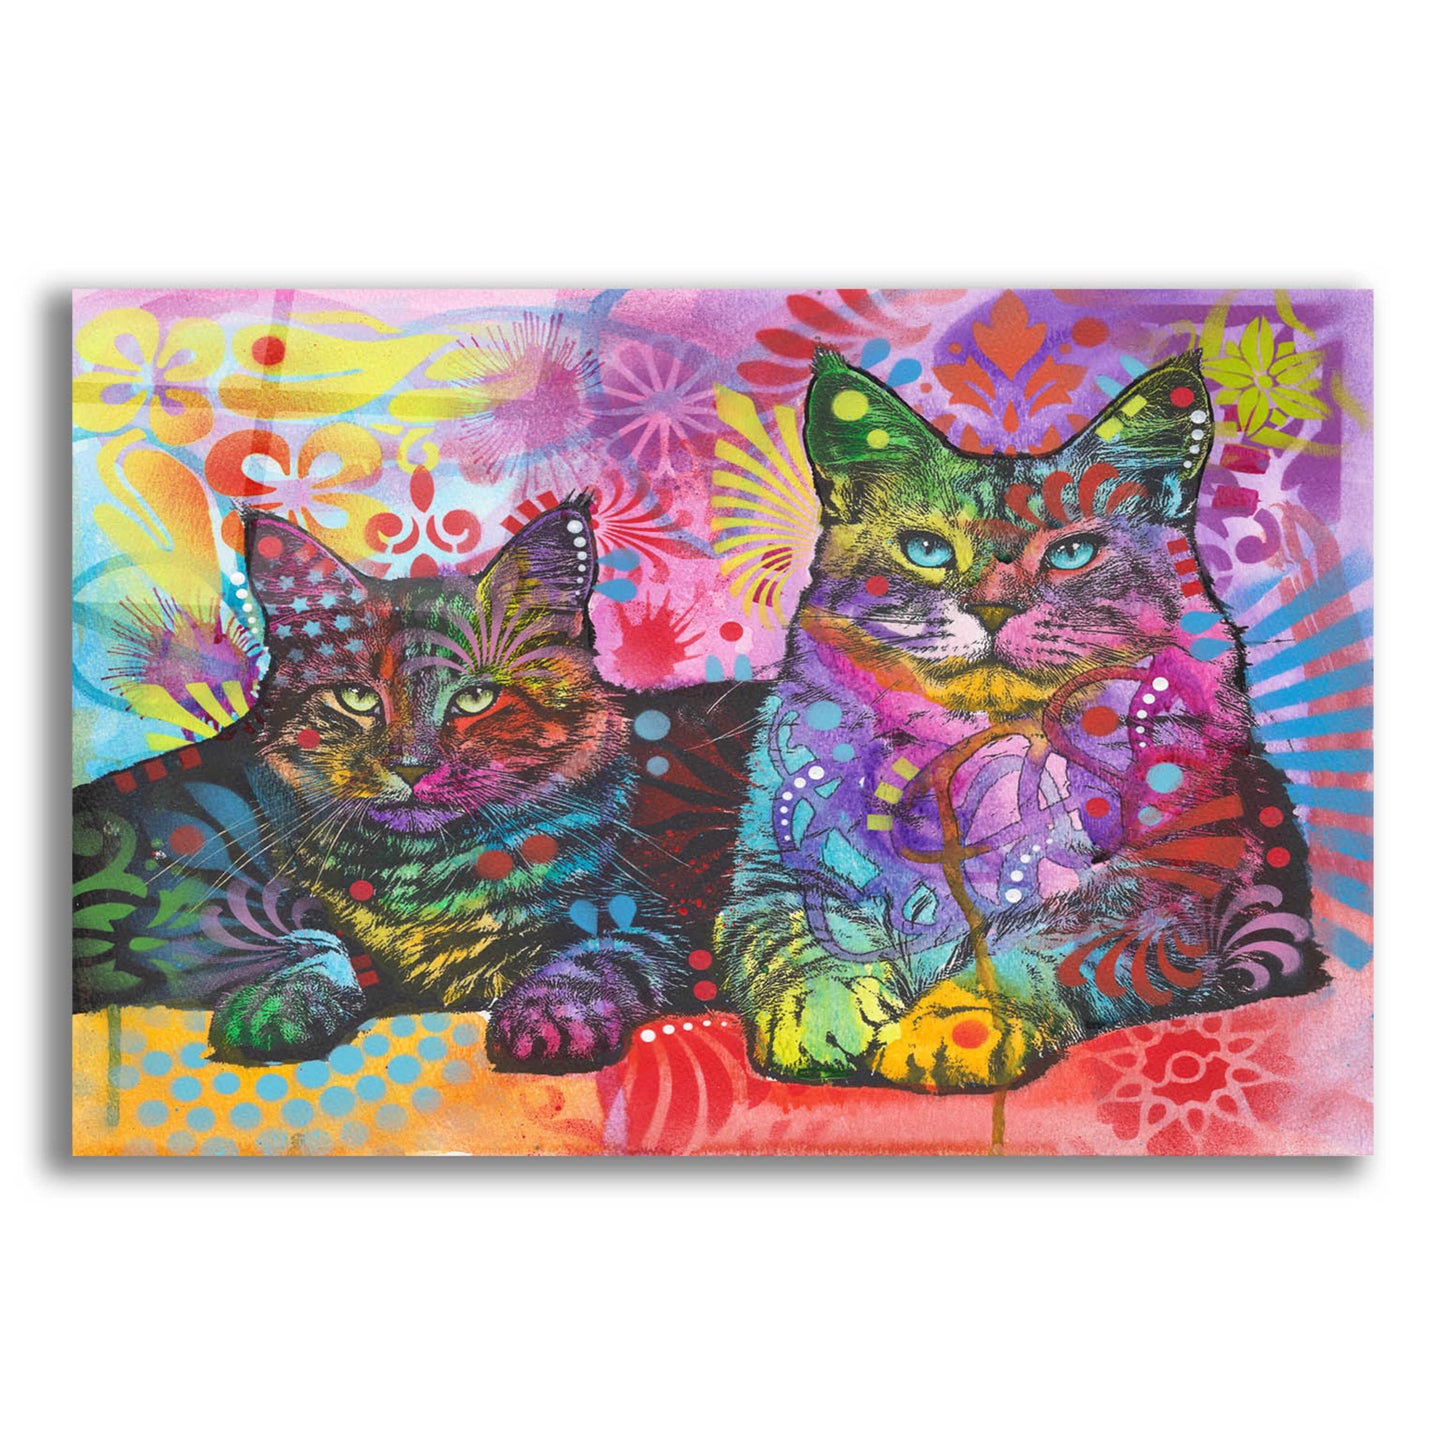 Epic Art '2 Cats' by Dean Russo, Acrylic Glass Wall Art,24x16